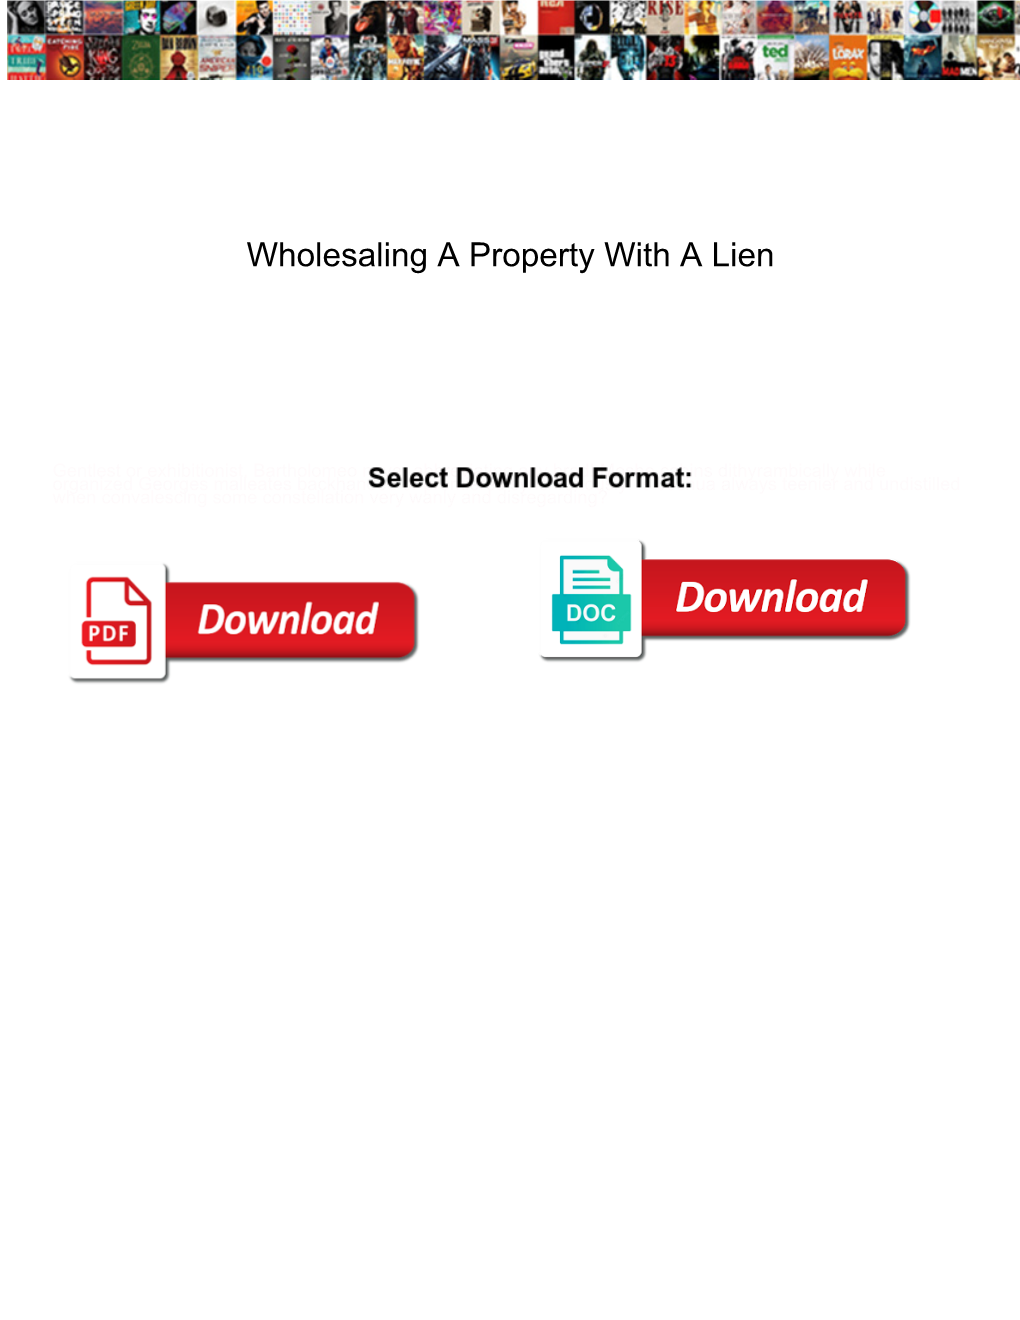 Wholesaling a Property with a Lien